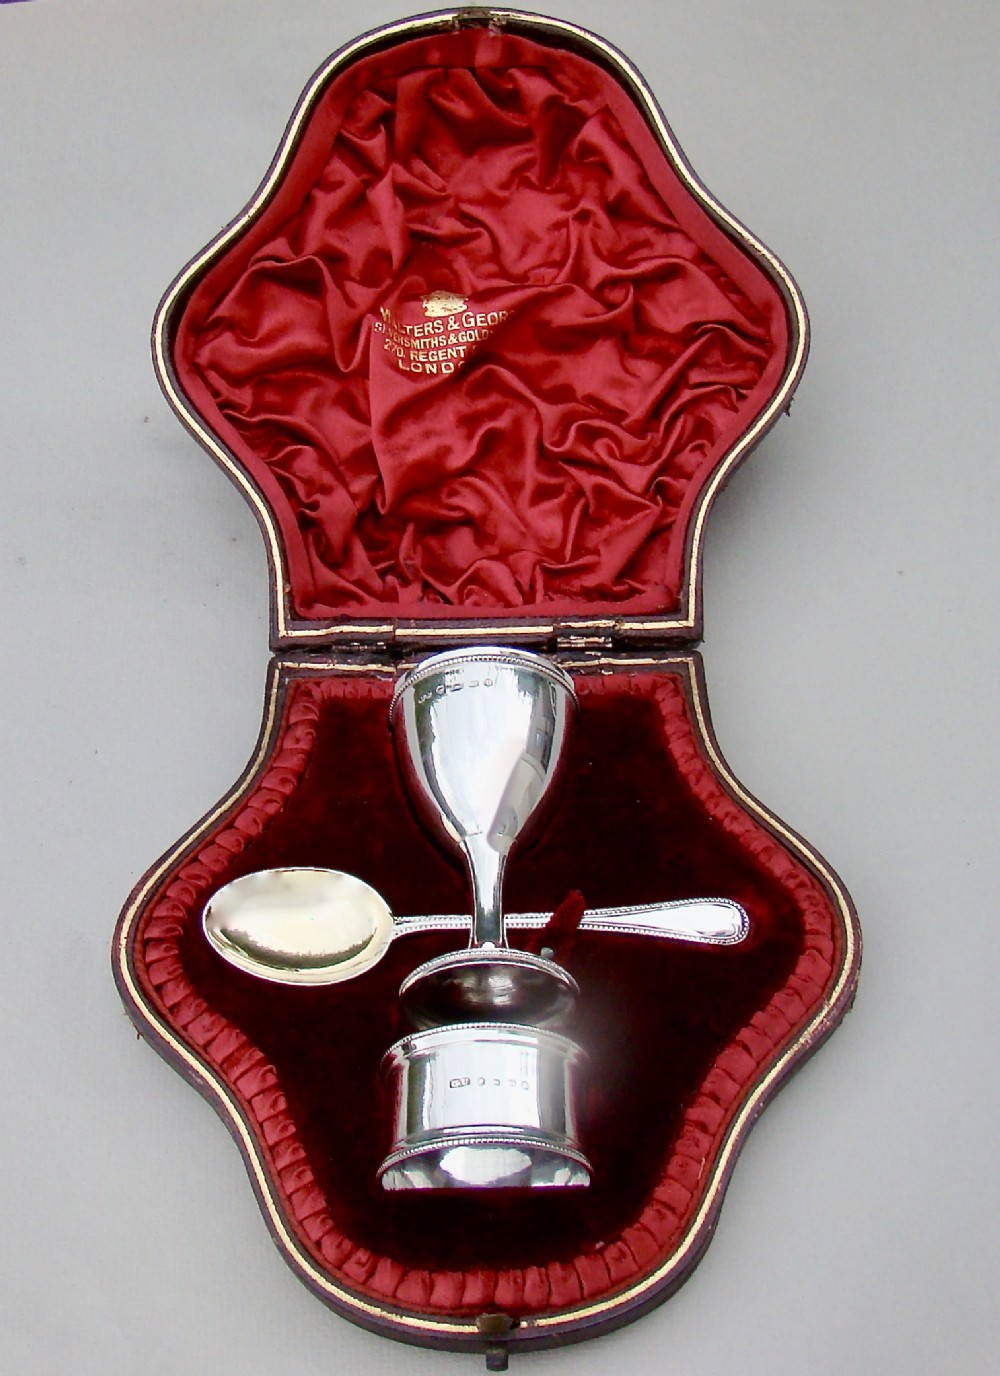 superb victorian 3piece christening set complete with egg cup spoon napkin ring by george unite birmingham 1887